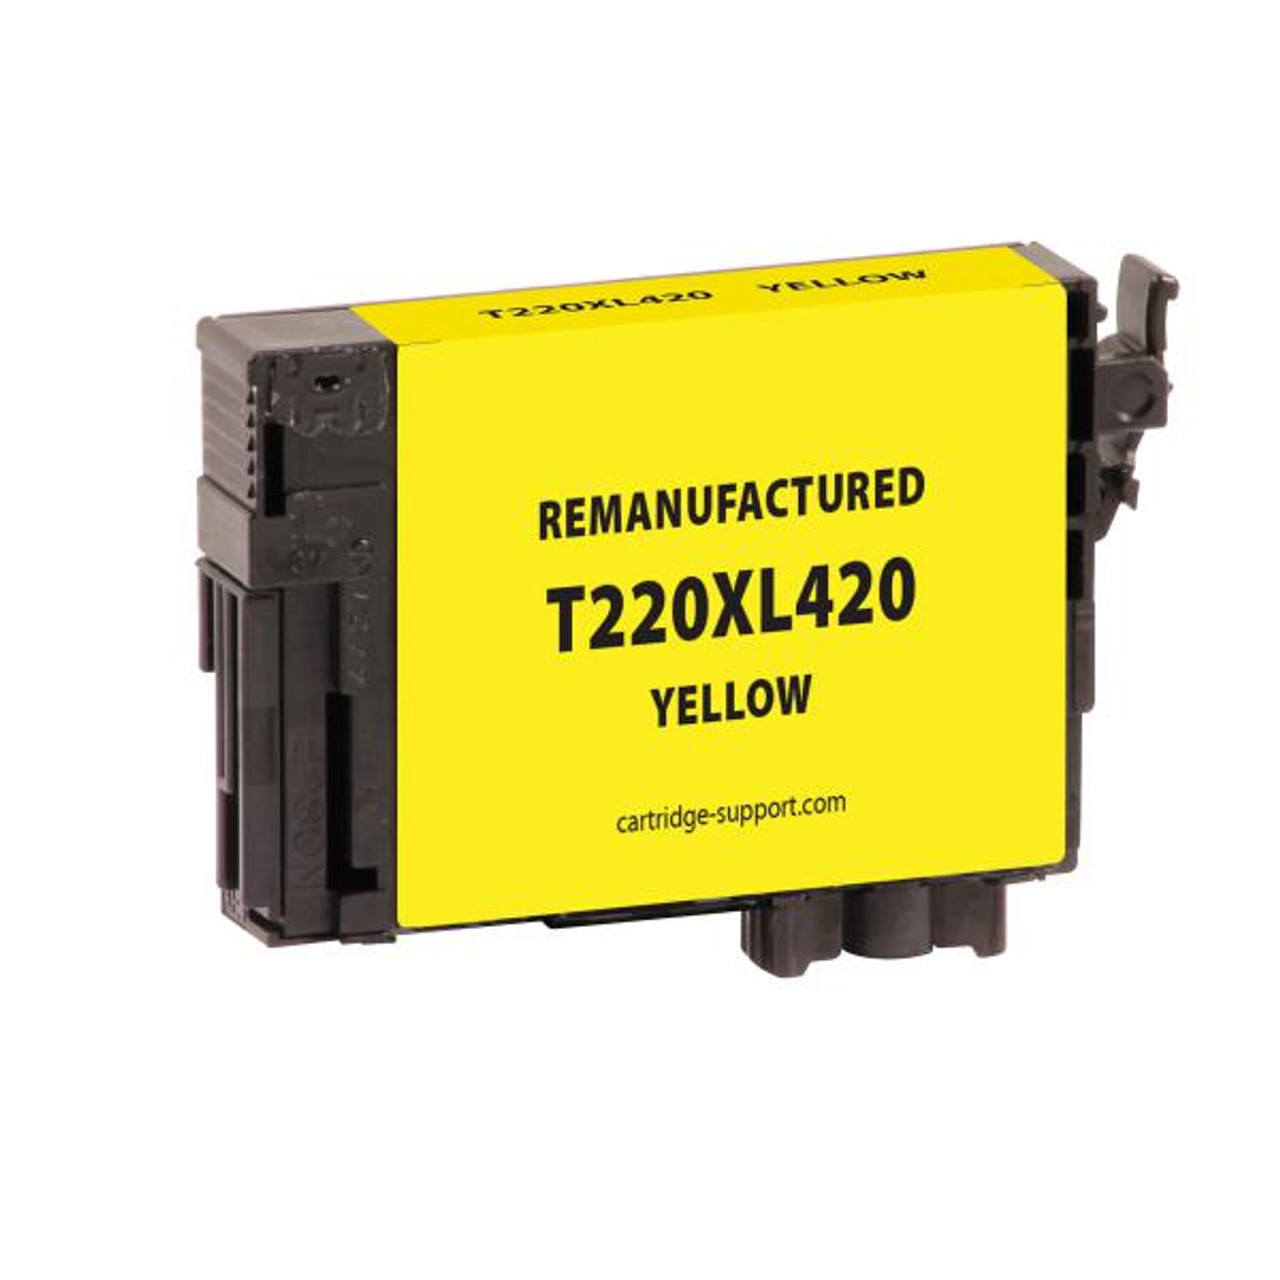 High Capacity Yellow Ink Cartridge for Epson T220XL420-1